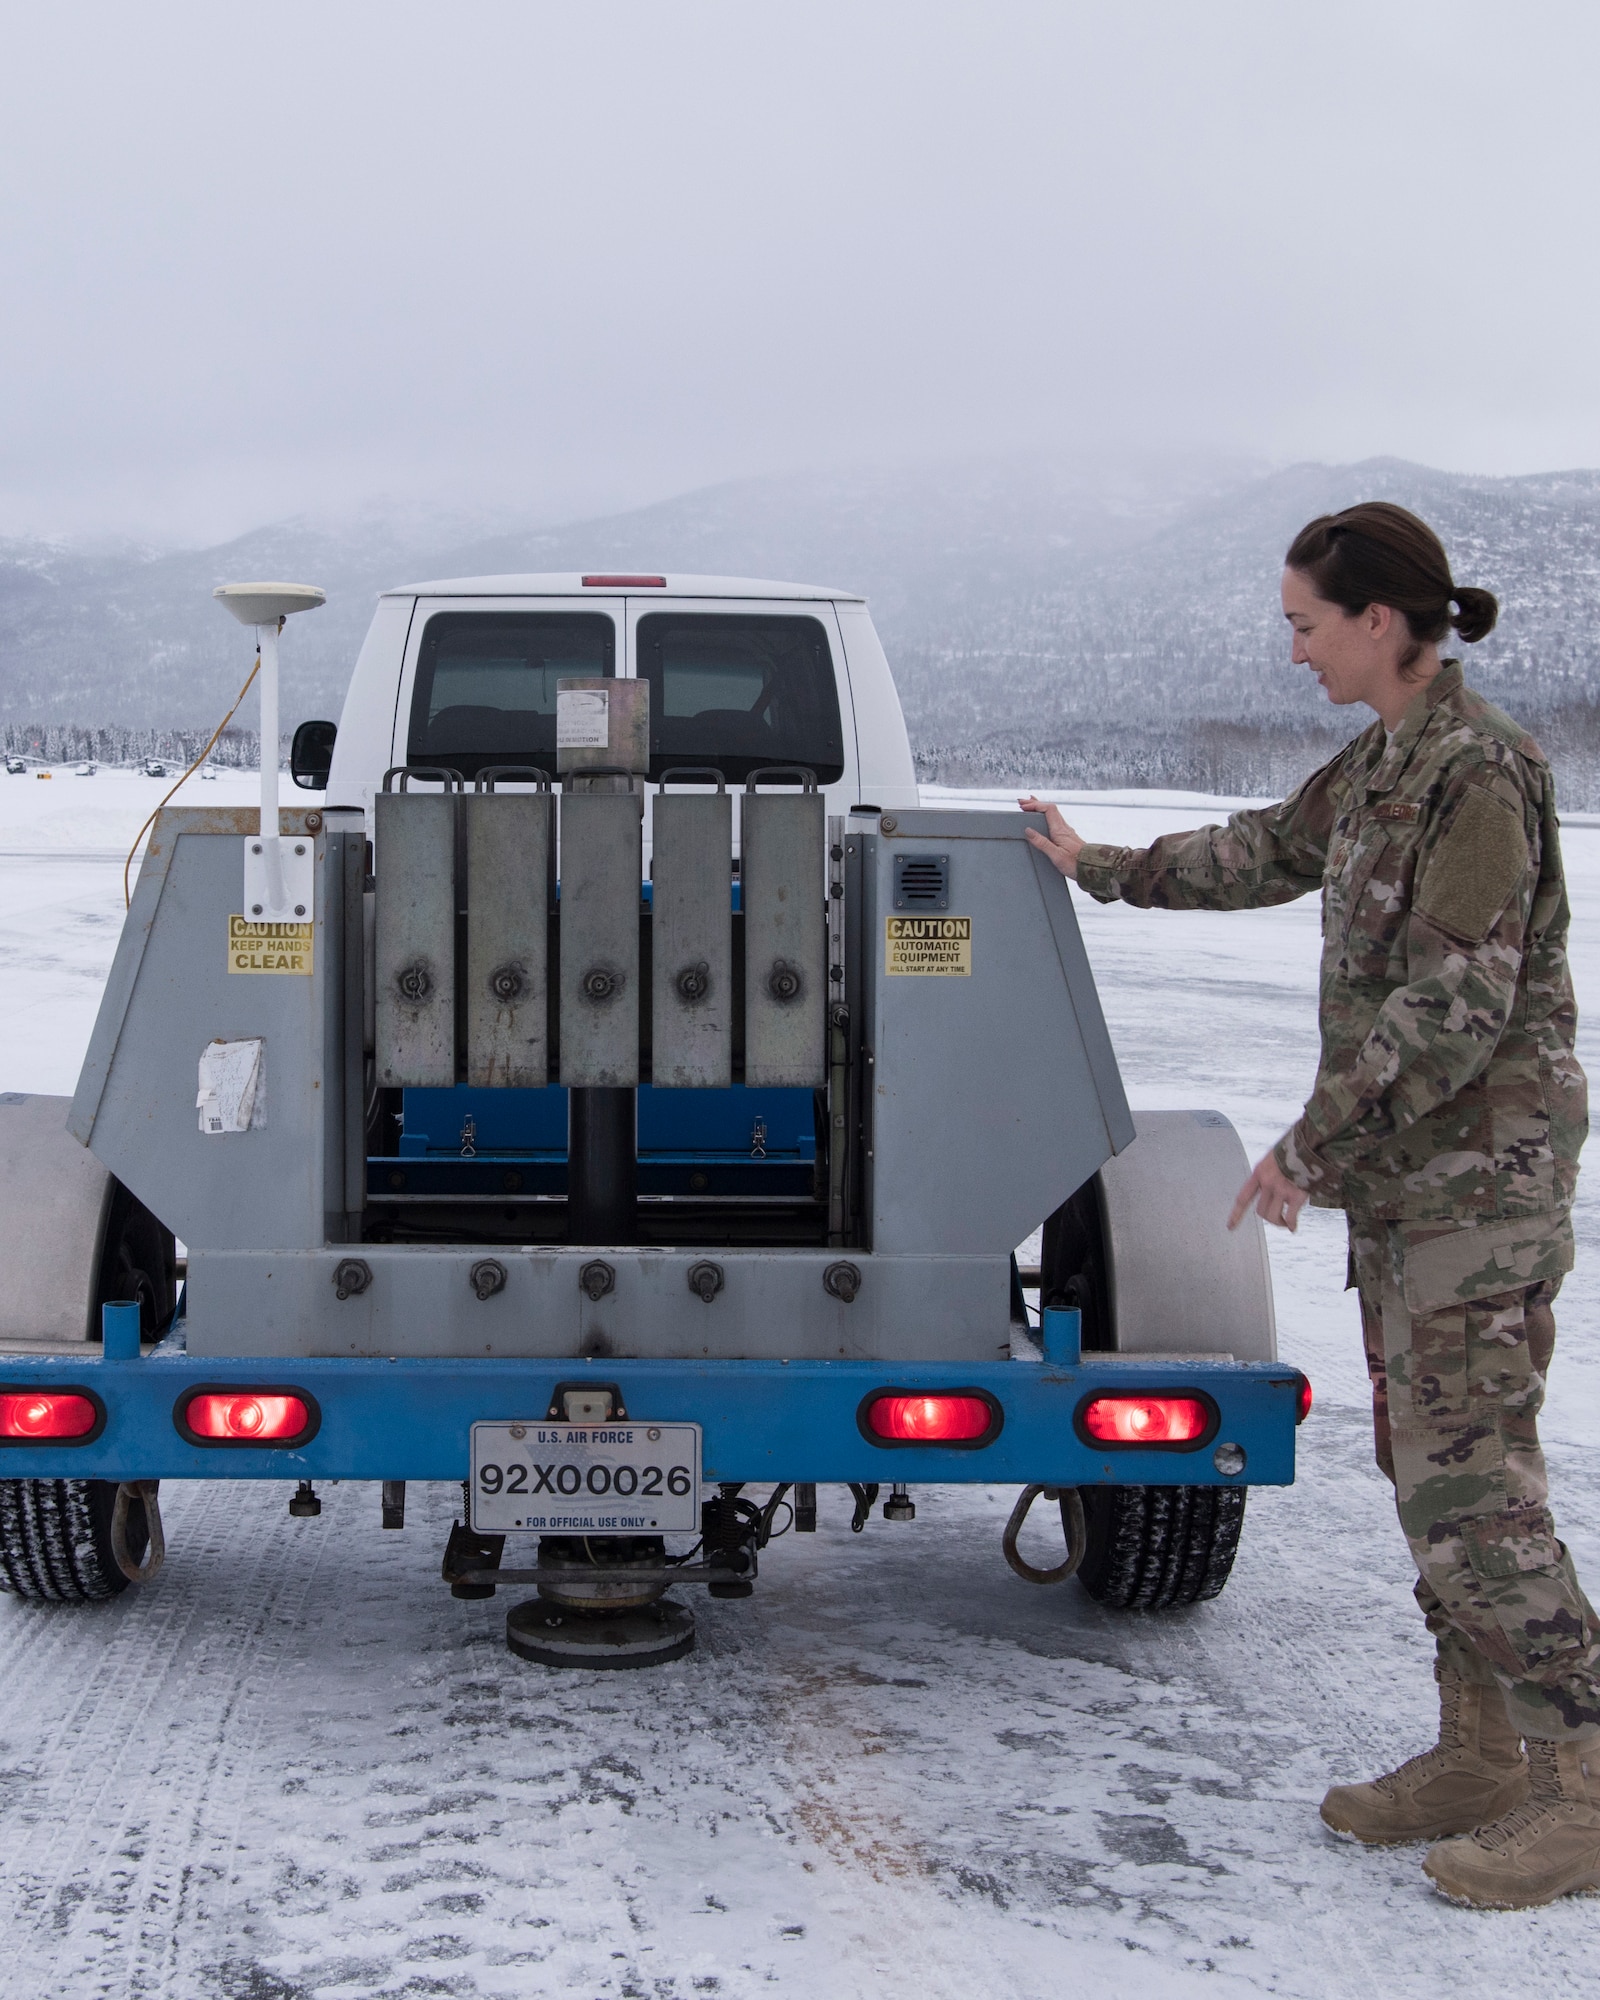 U.S. Air Force Master Sgt. Jill Reed, Air Force Civil Engineer Center’s Airfield Pavement Evaluation Team superintendent, checks a special heavy falling weight Dynatest deflectometer, during an evaluation of Bryant Army Airfield at Joint Base Elmendorf-Richardson, Alaska Dec. 17, 2018.  A two-person team used non-destructive testing to assess potential non-visible pavement damage at all of JBER’s airfields following the Nov. 30, 7.0 magnitude earthquake, whose epicenter was located just north of the base. The deflectometer simulates 55,000 pounds of weight hitting the pavement at once. (U.S. Air Force photo by Airman 1st Class Crystal A. Jenkins)